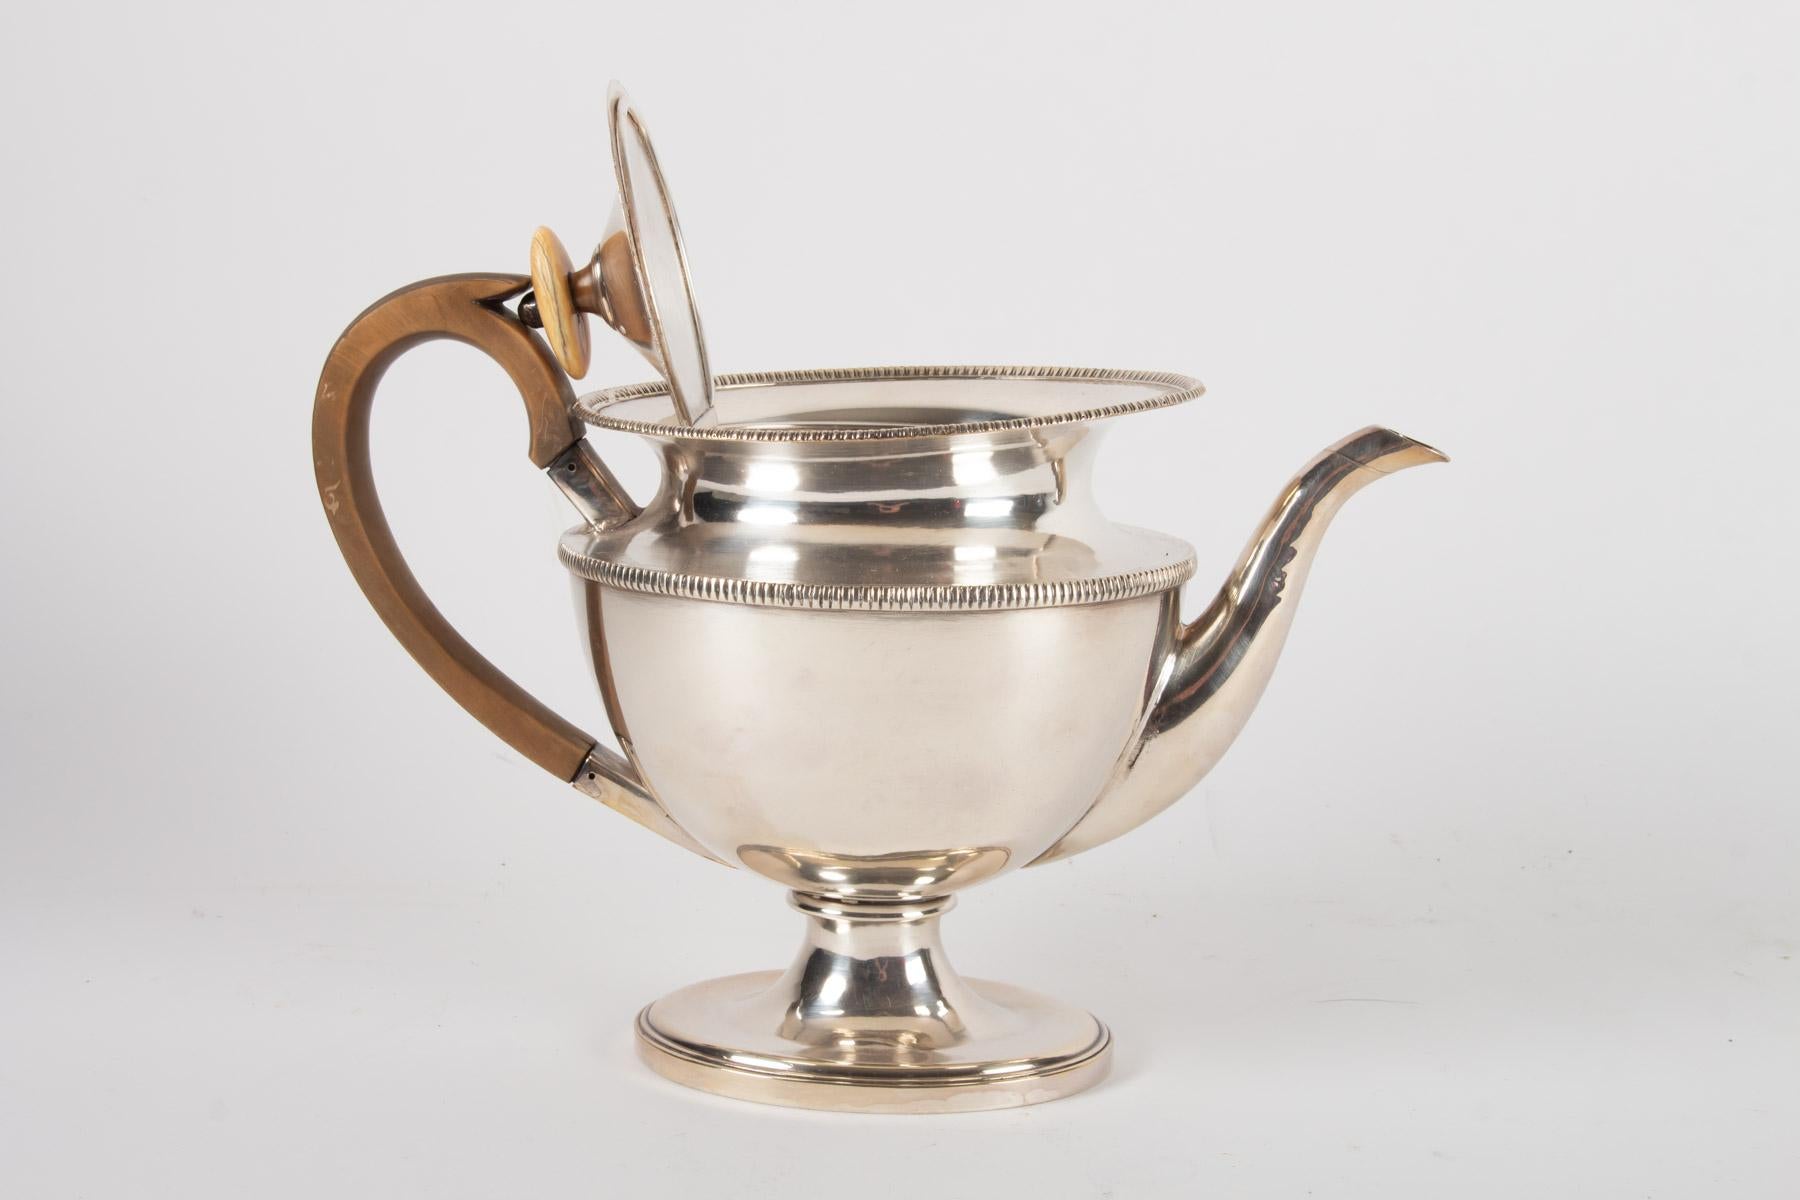 Teapot, Silver Metal, 19th Century Antiquity, Empire Period, Carved Wood Handle 4